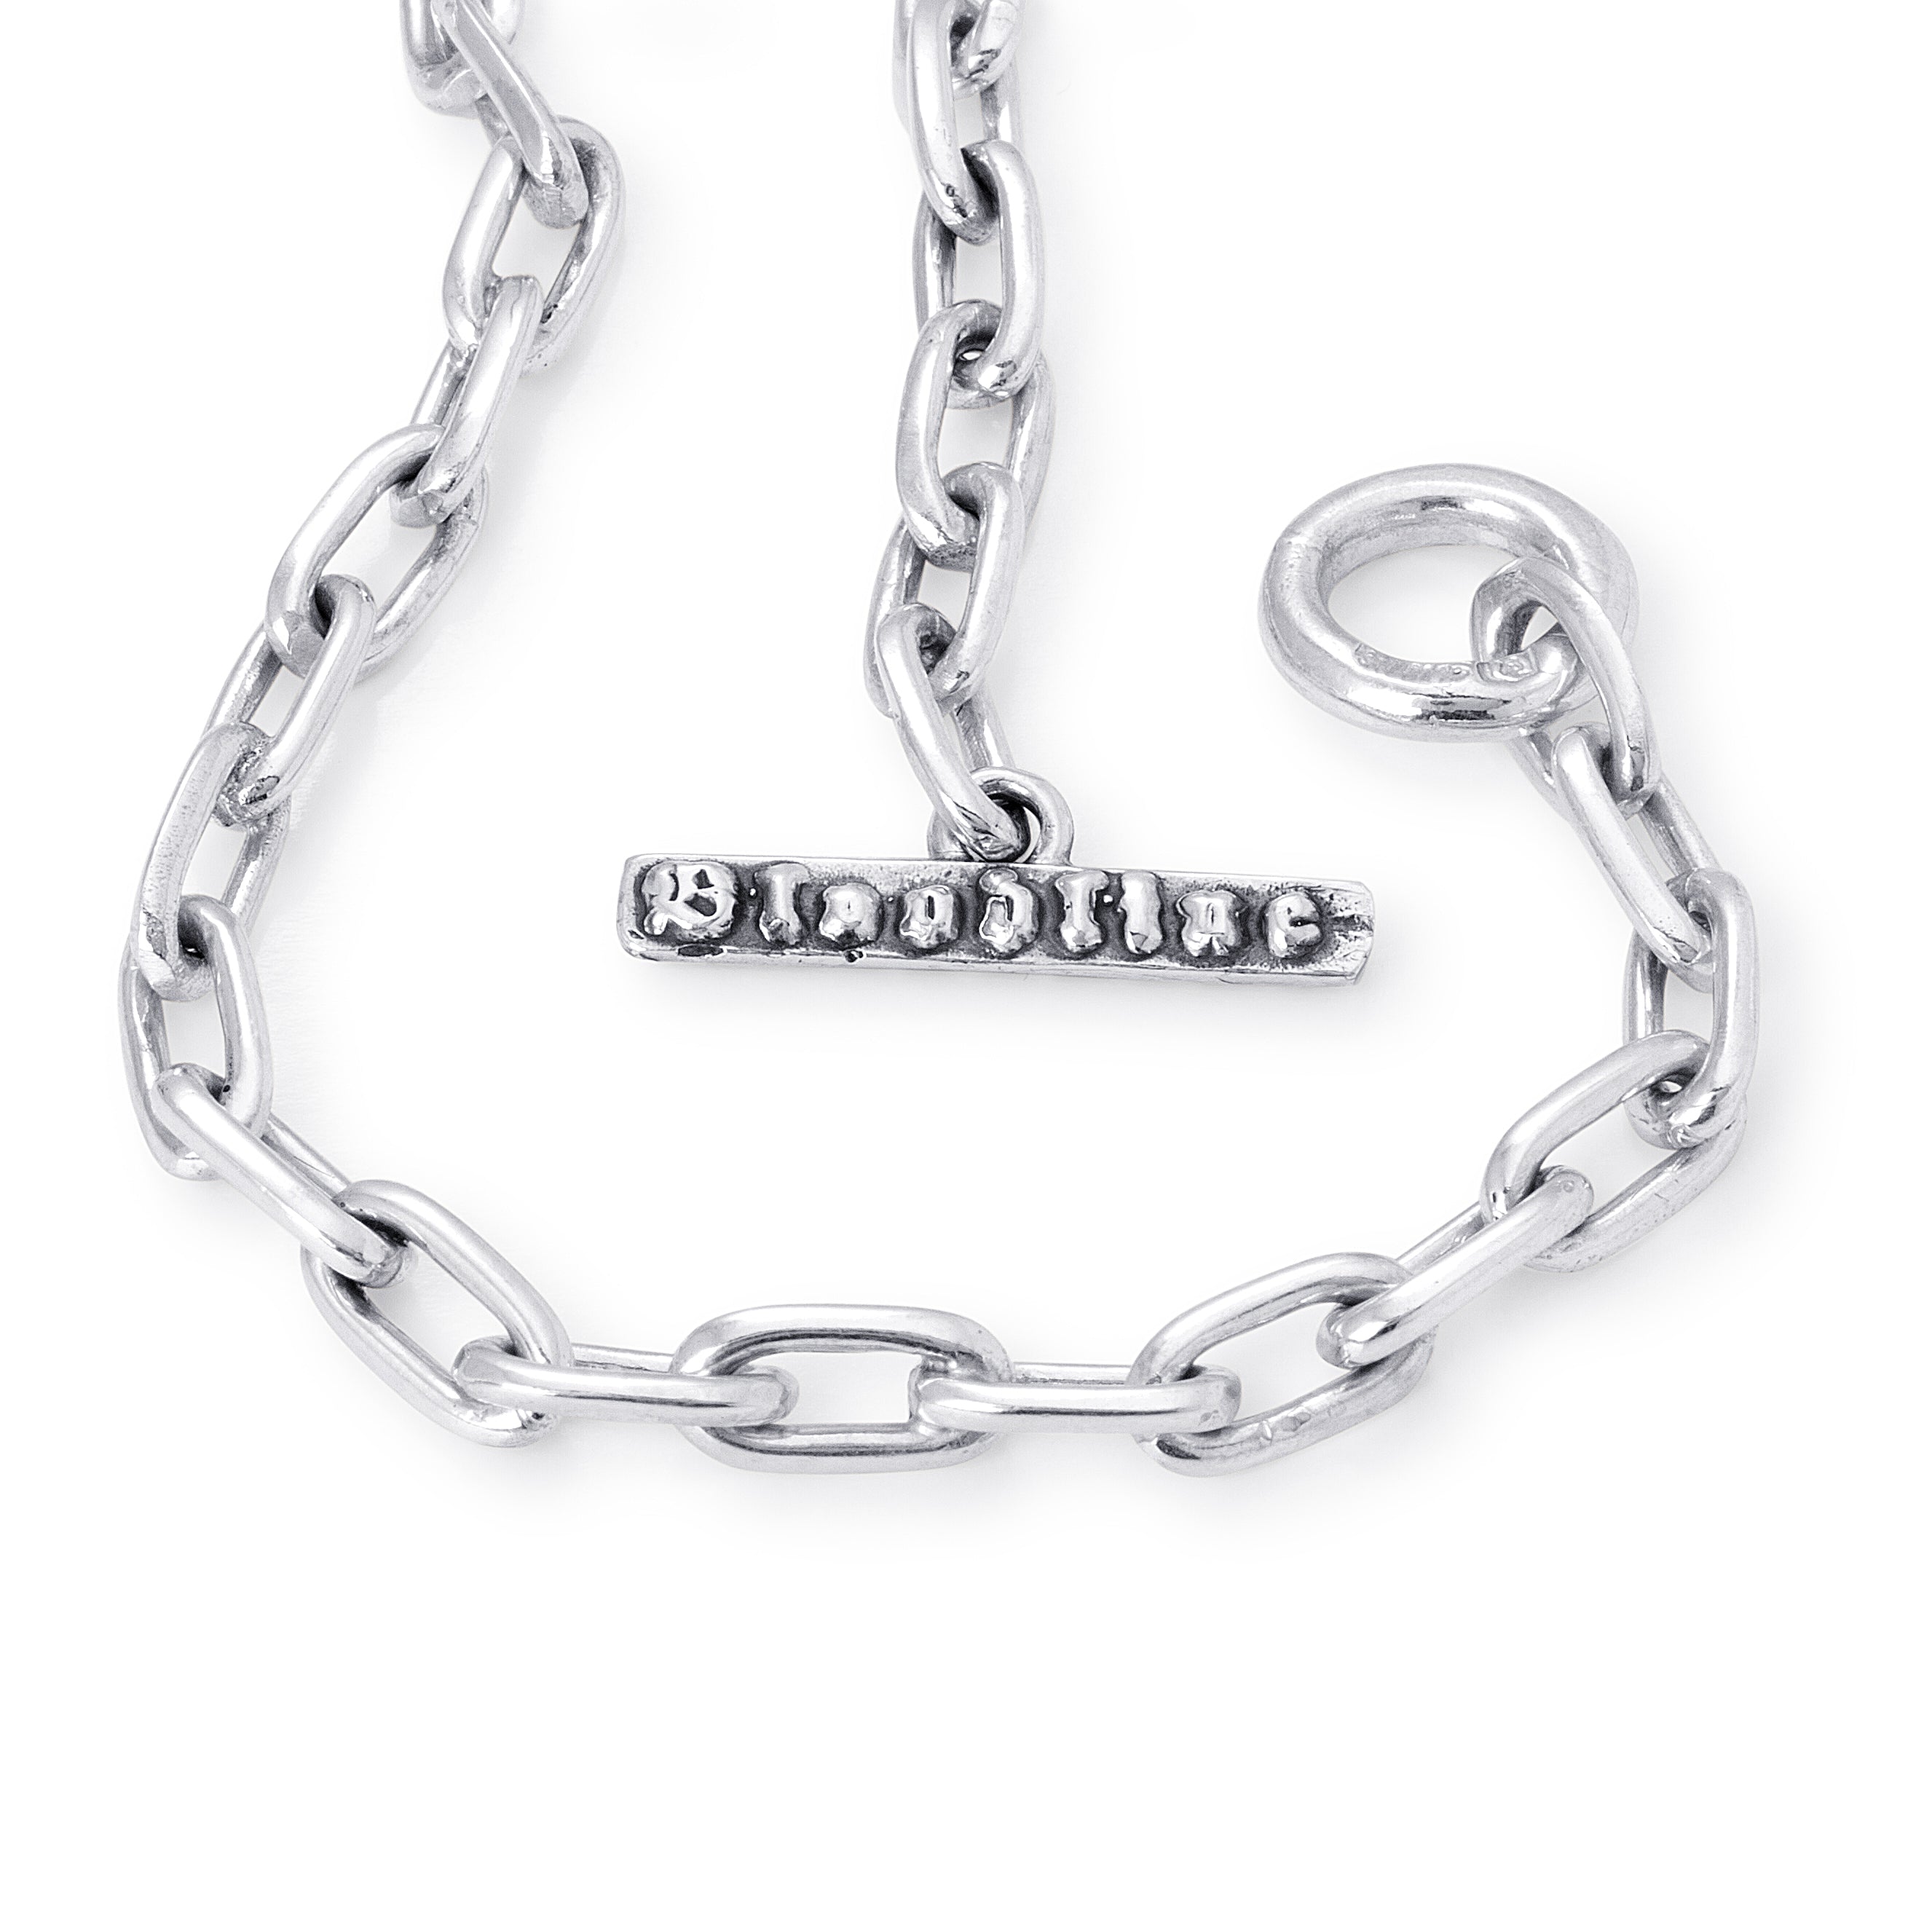 Bloodline Design Canada W-Necklaces The London Link Chain toggle